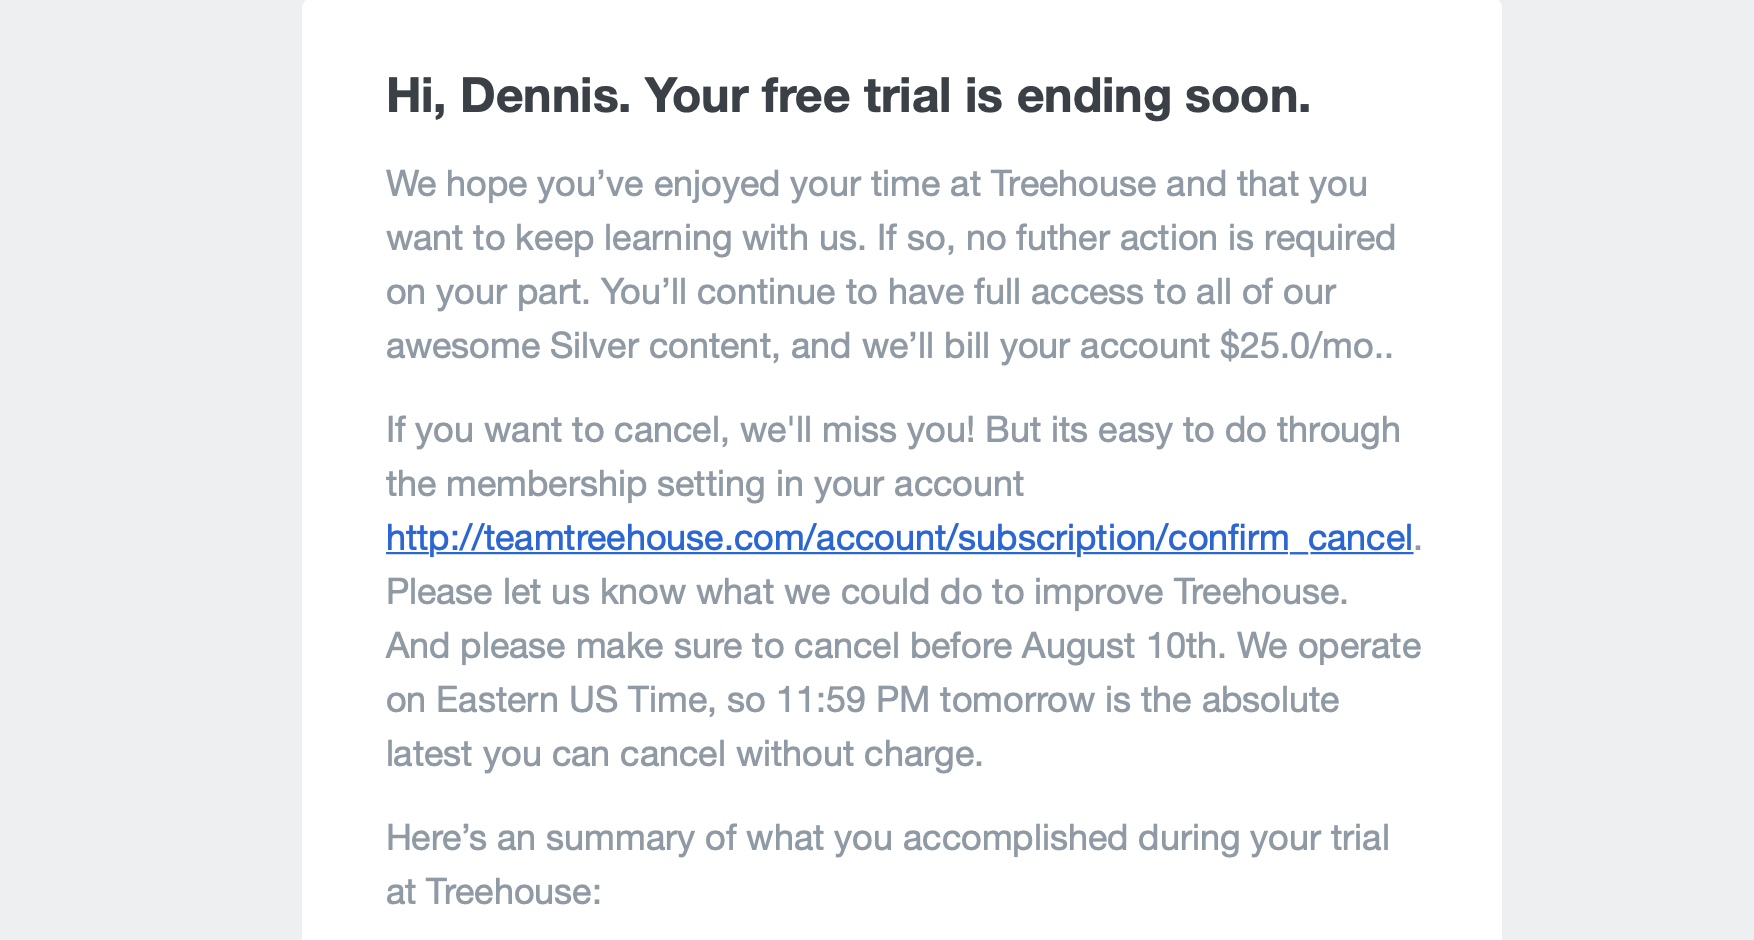 Treehouse displays confidence in the product they built by making it easy to cancel